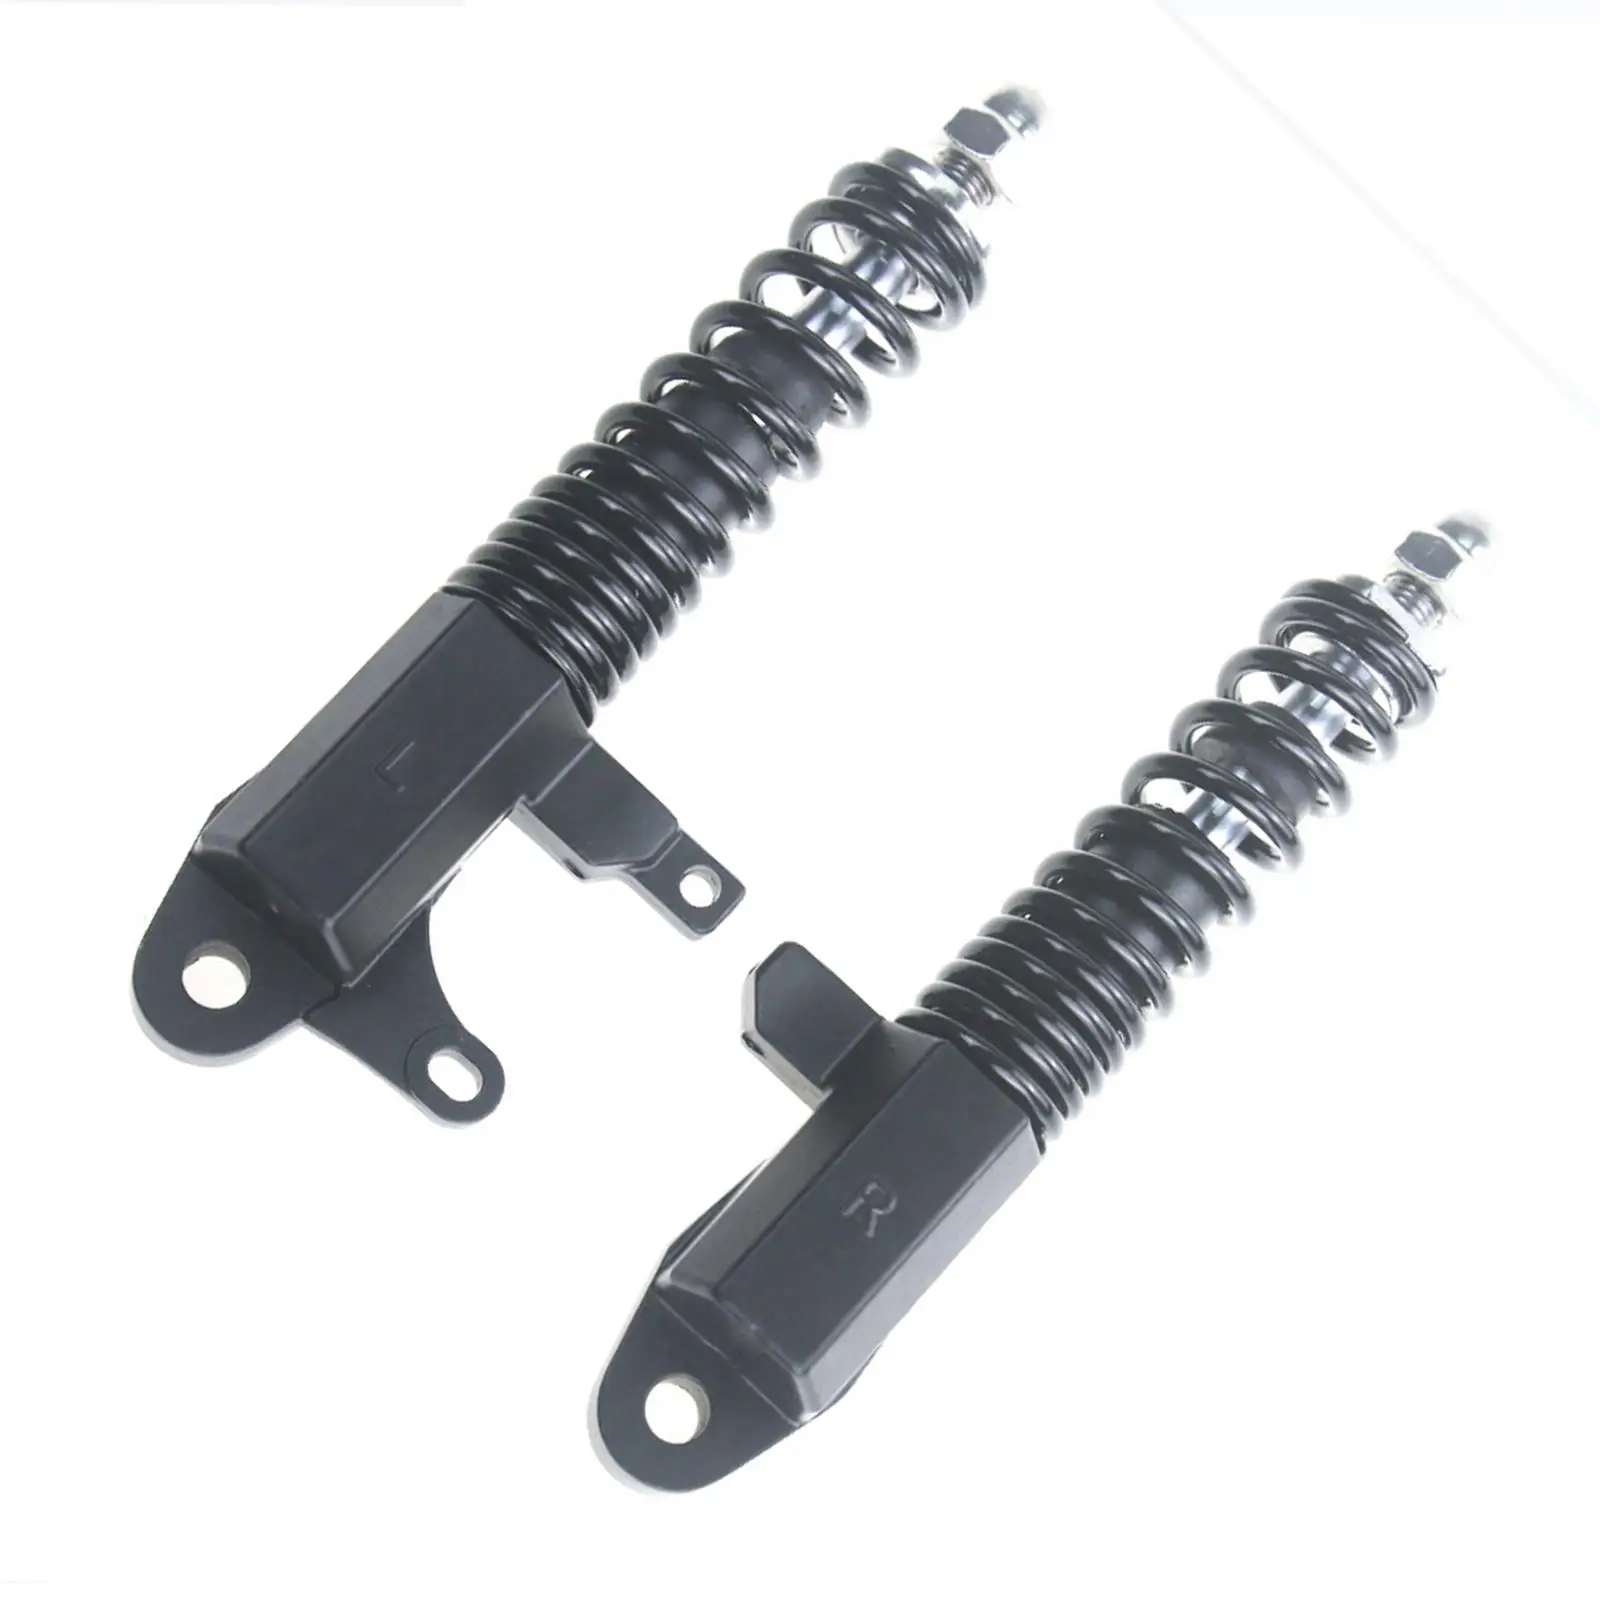 2x Front Fork Shock Absorber 10inch Premium Aluminum Alloy Durable for M4 Pro M12